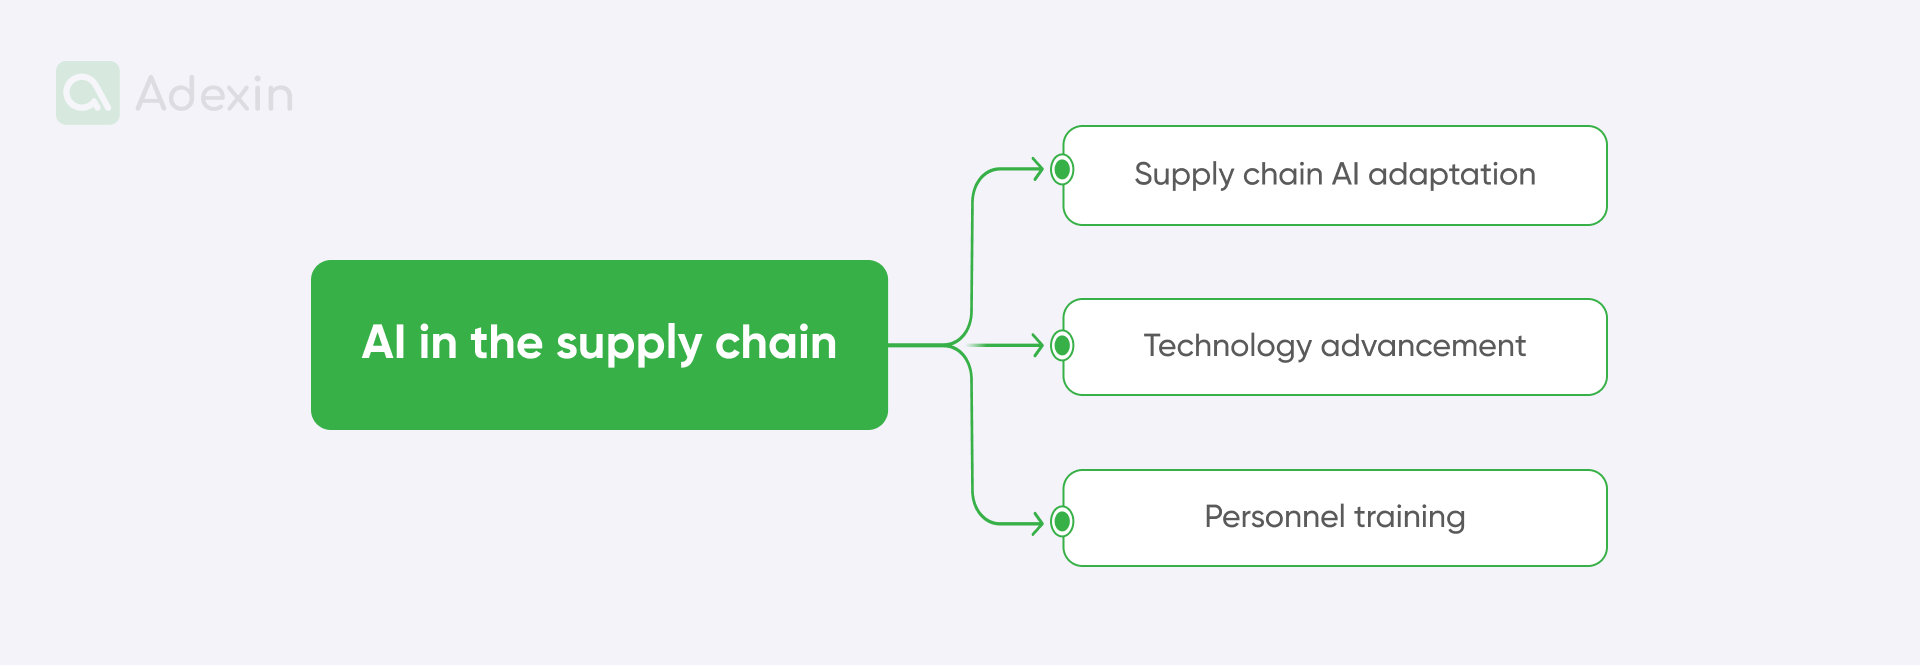 Elements of implementation of AI in the supply chain